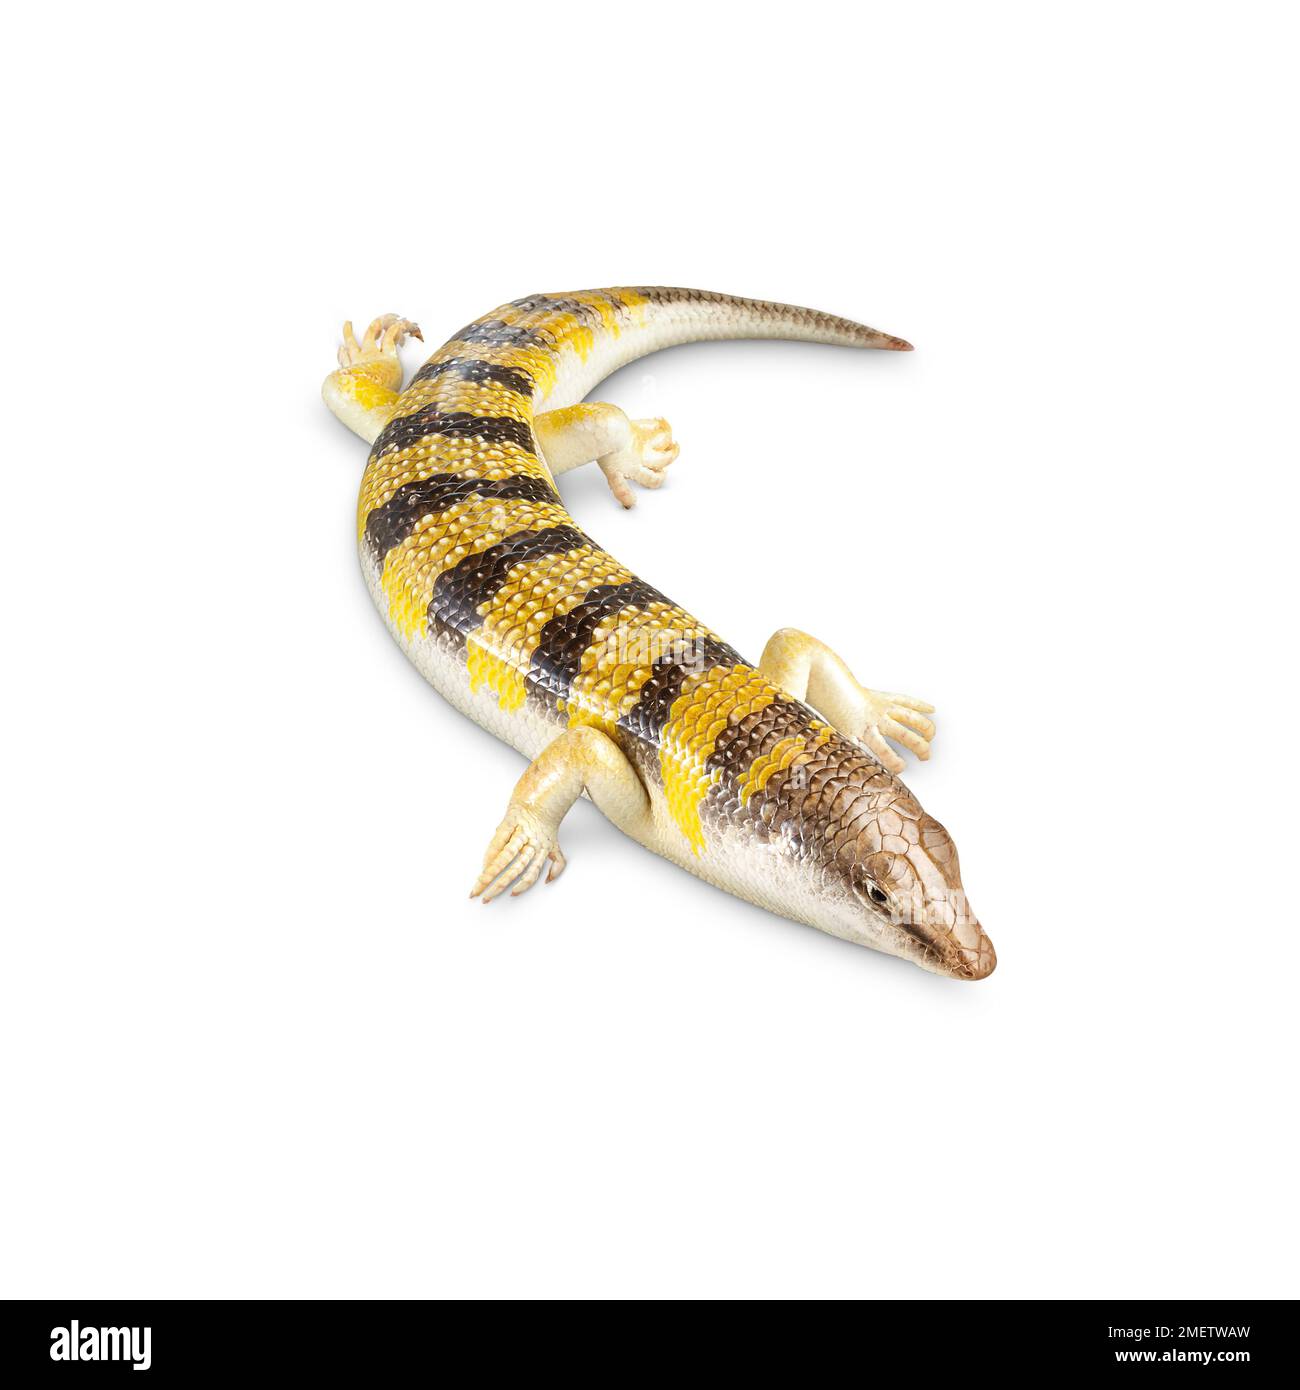 Common sandfish: what is the Scincus scincus and how does it swim through  sand? - Discover Wildlife